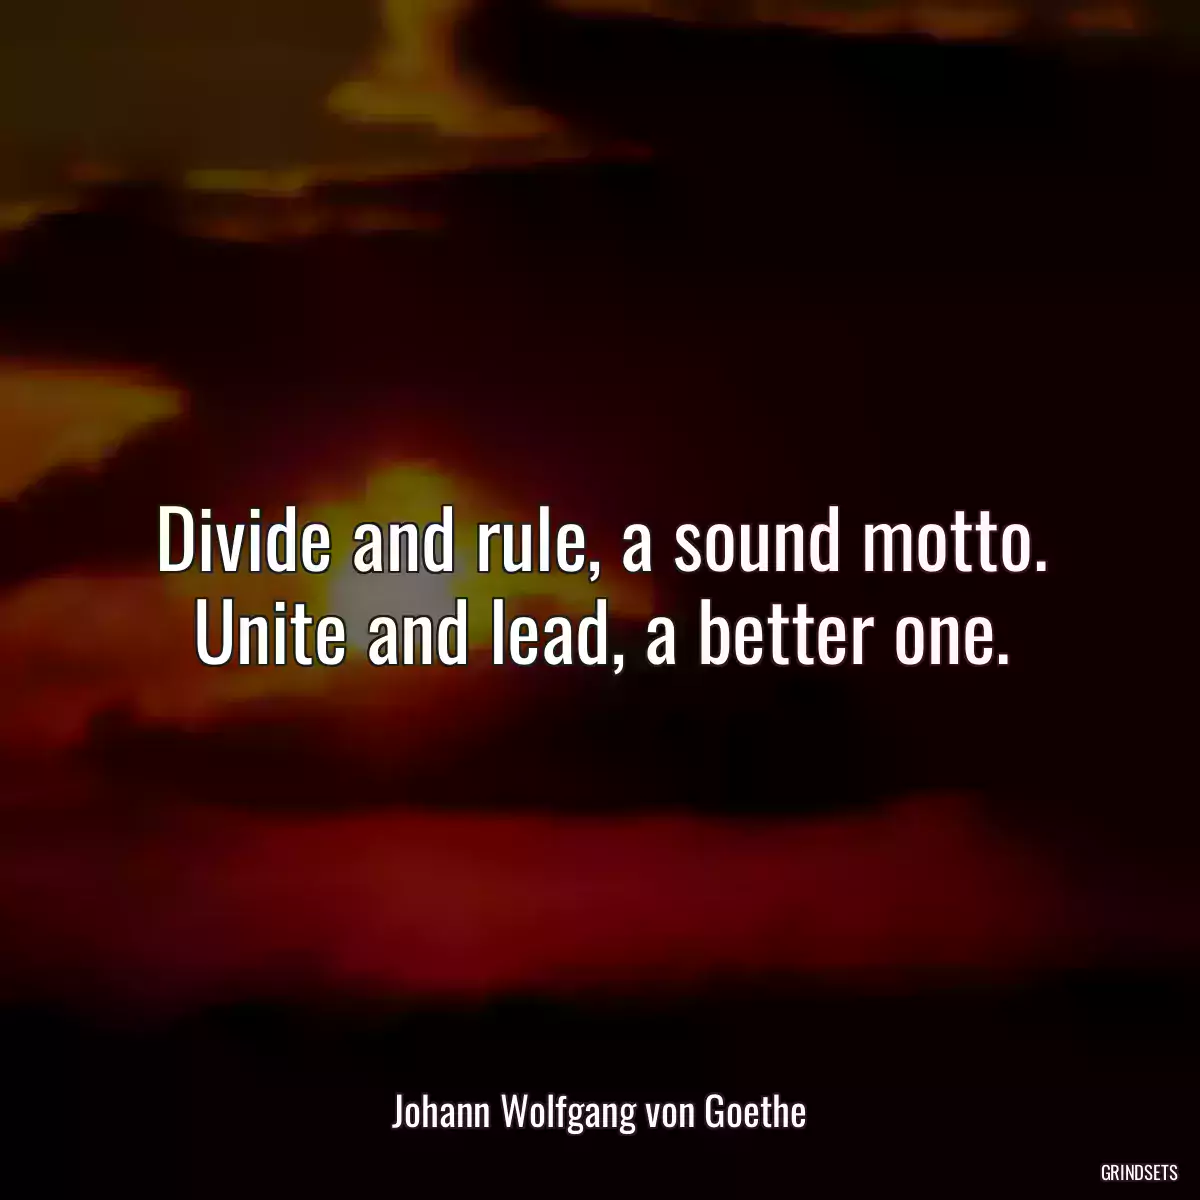 Divide and rule, a sound motto. Unite and lead, a better one.